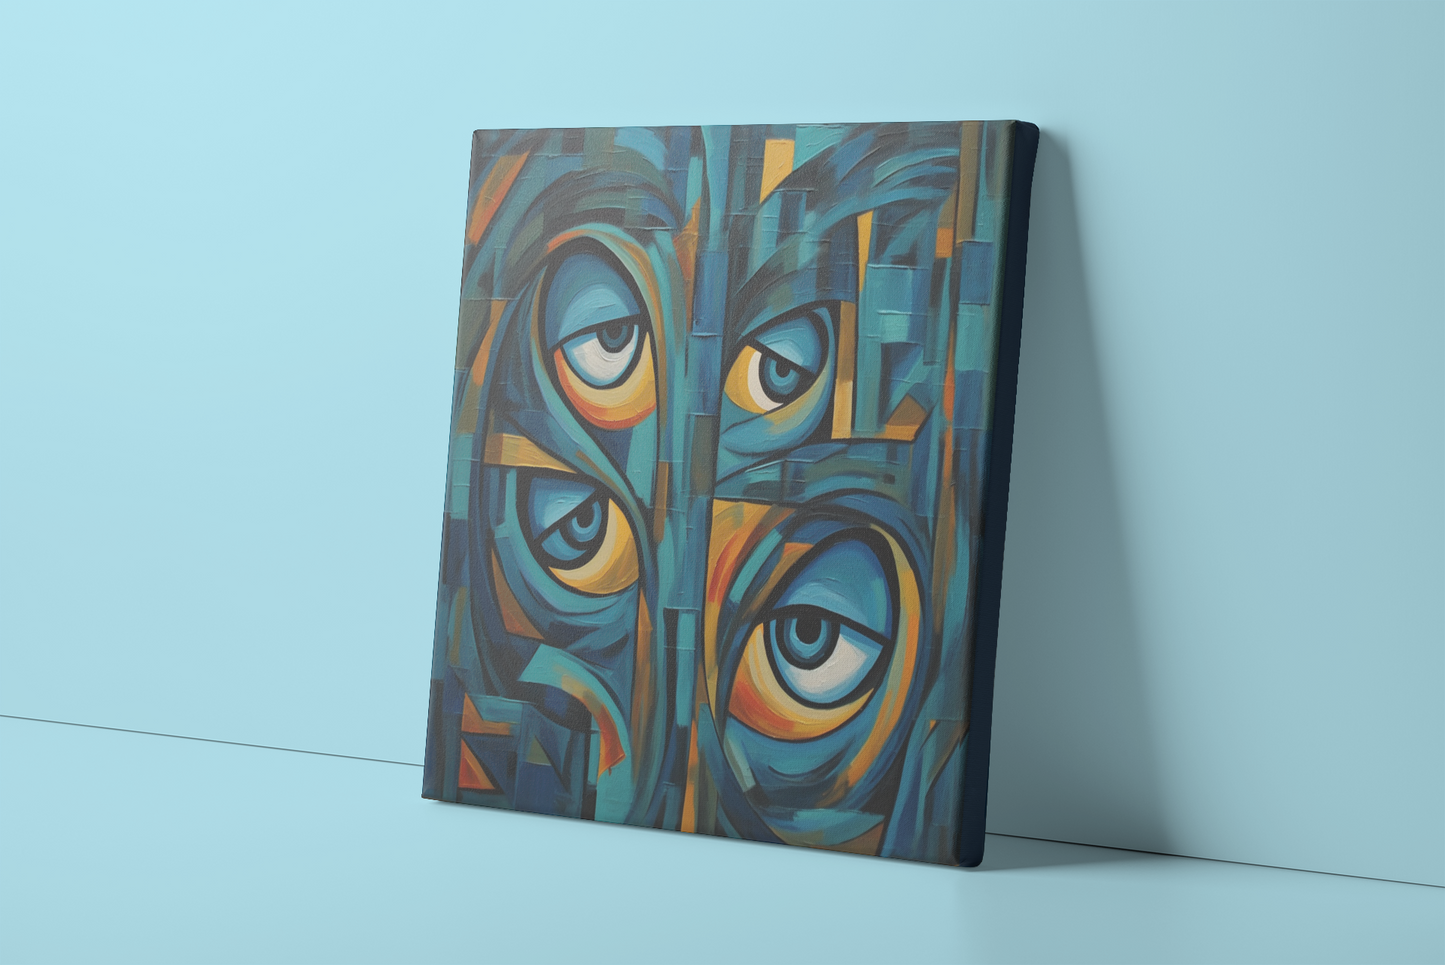 Abstract Eyes Canvas Wall Art, Abstract Painting, New Perspectives Canvas Painting, Contemplative Square Stretched Canvas Wall Art